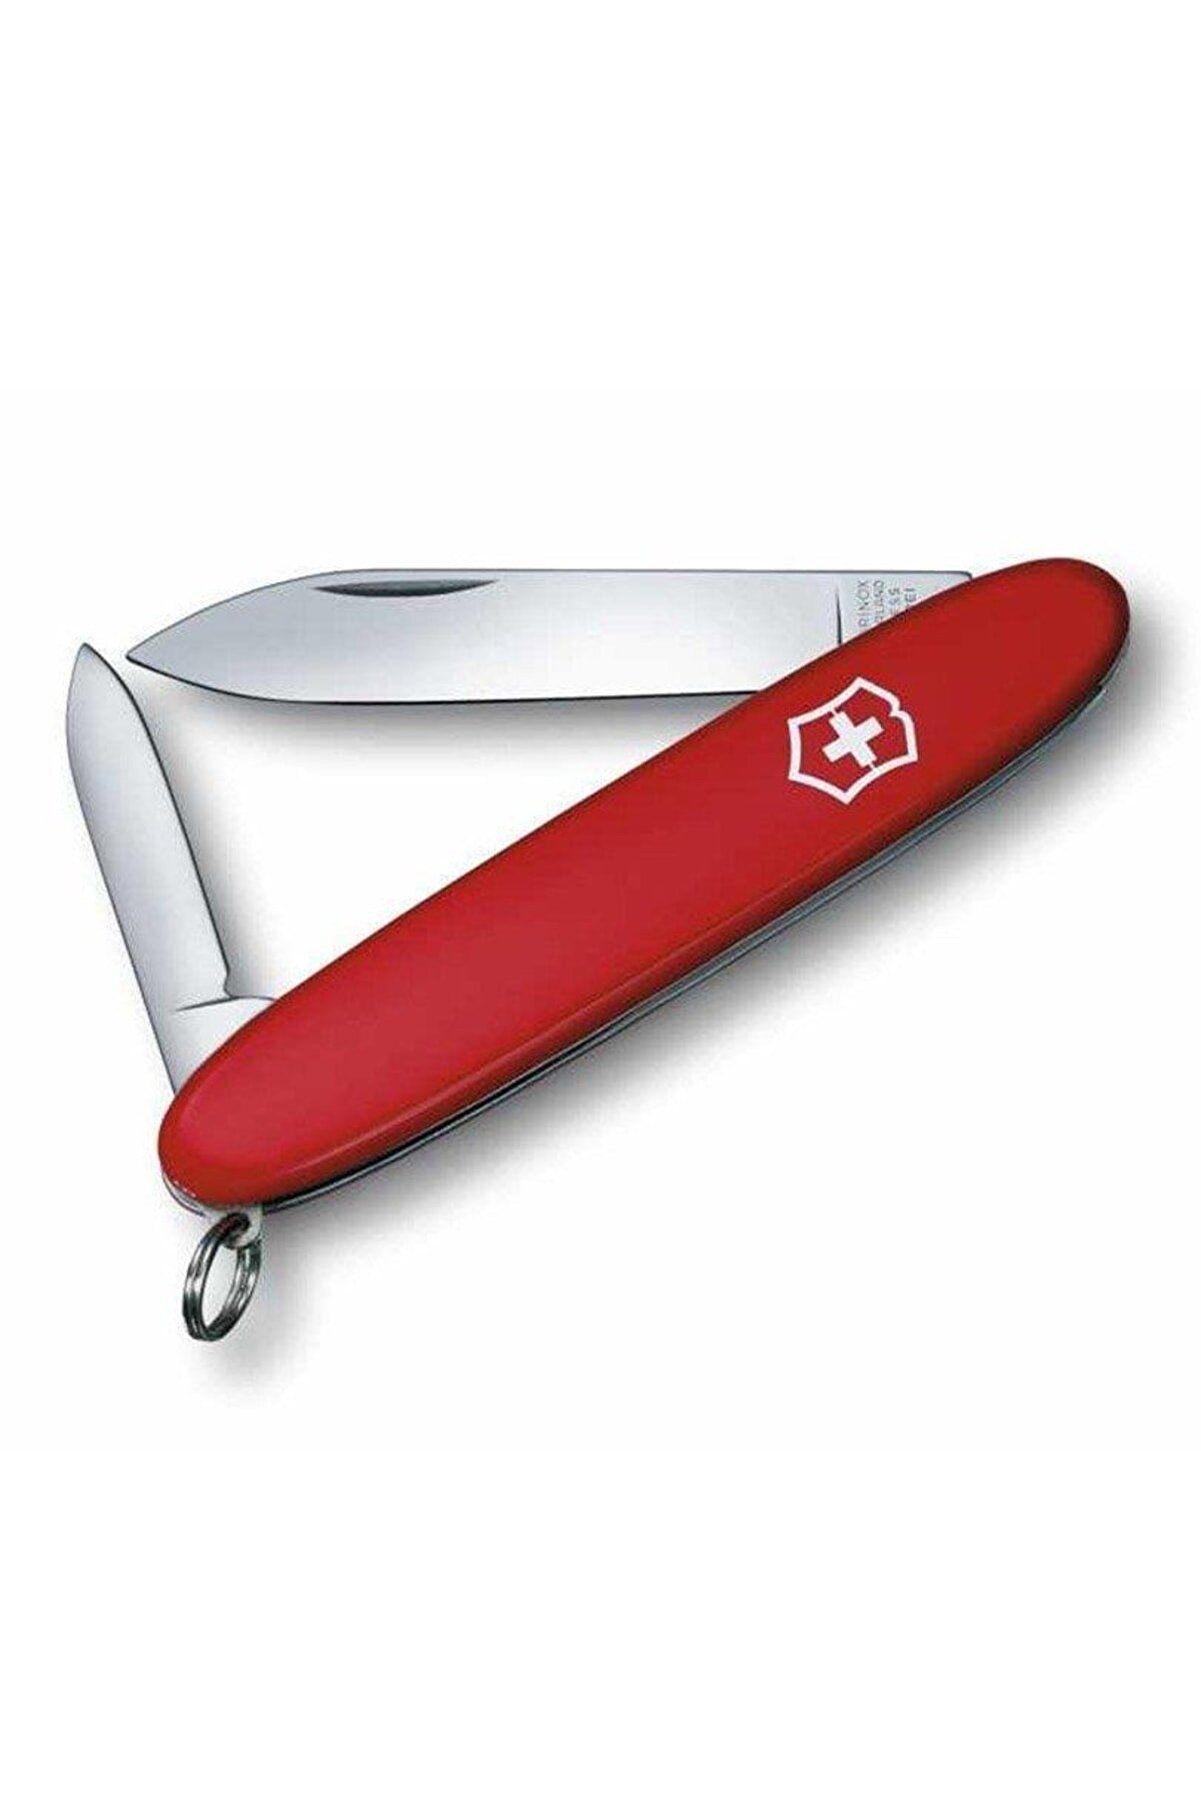 VICTORINOX 0.6901 Excelsior With Keyring